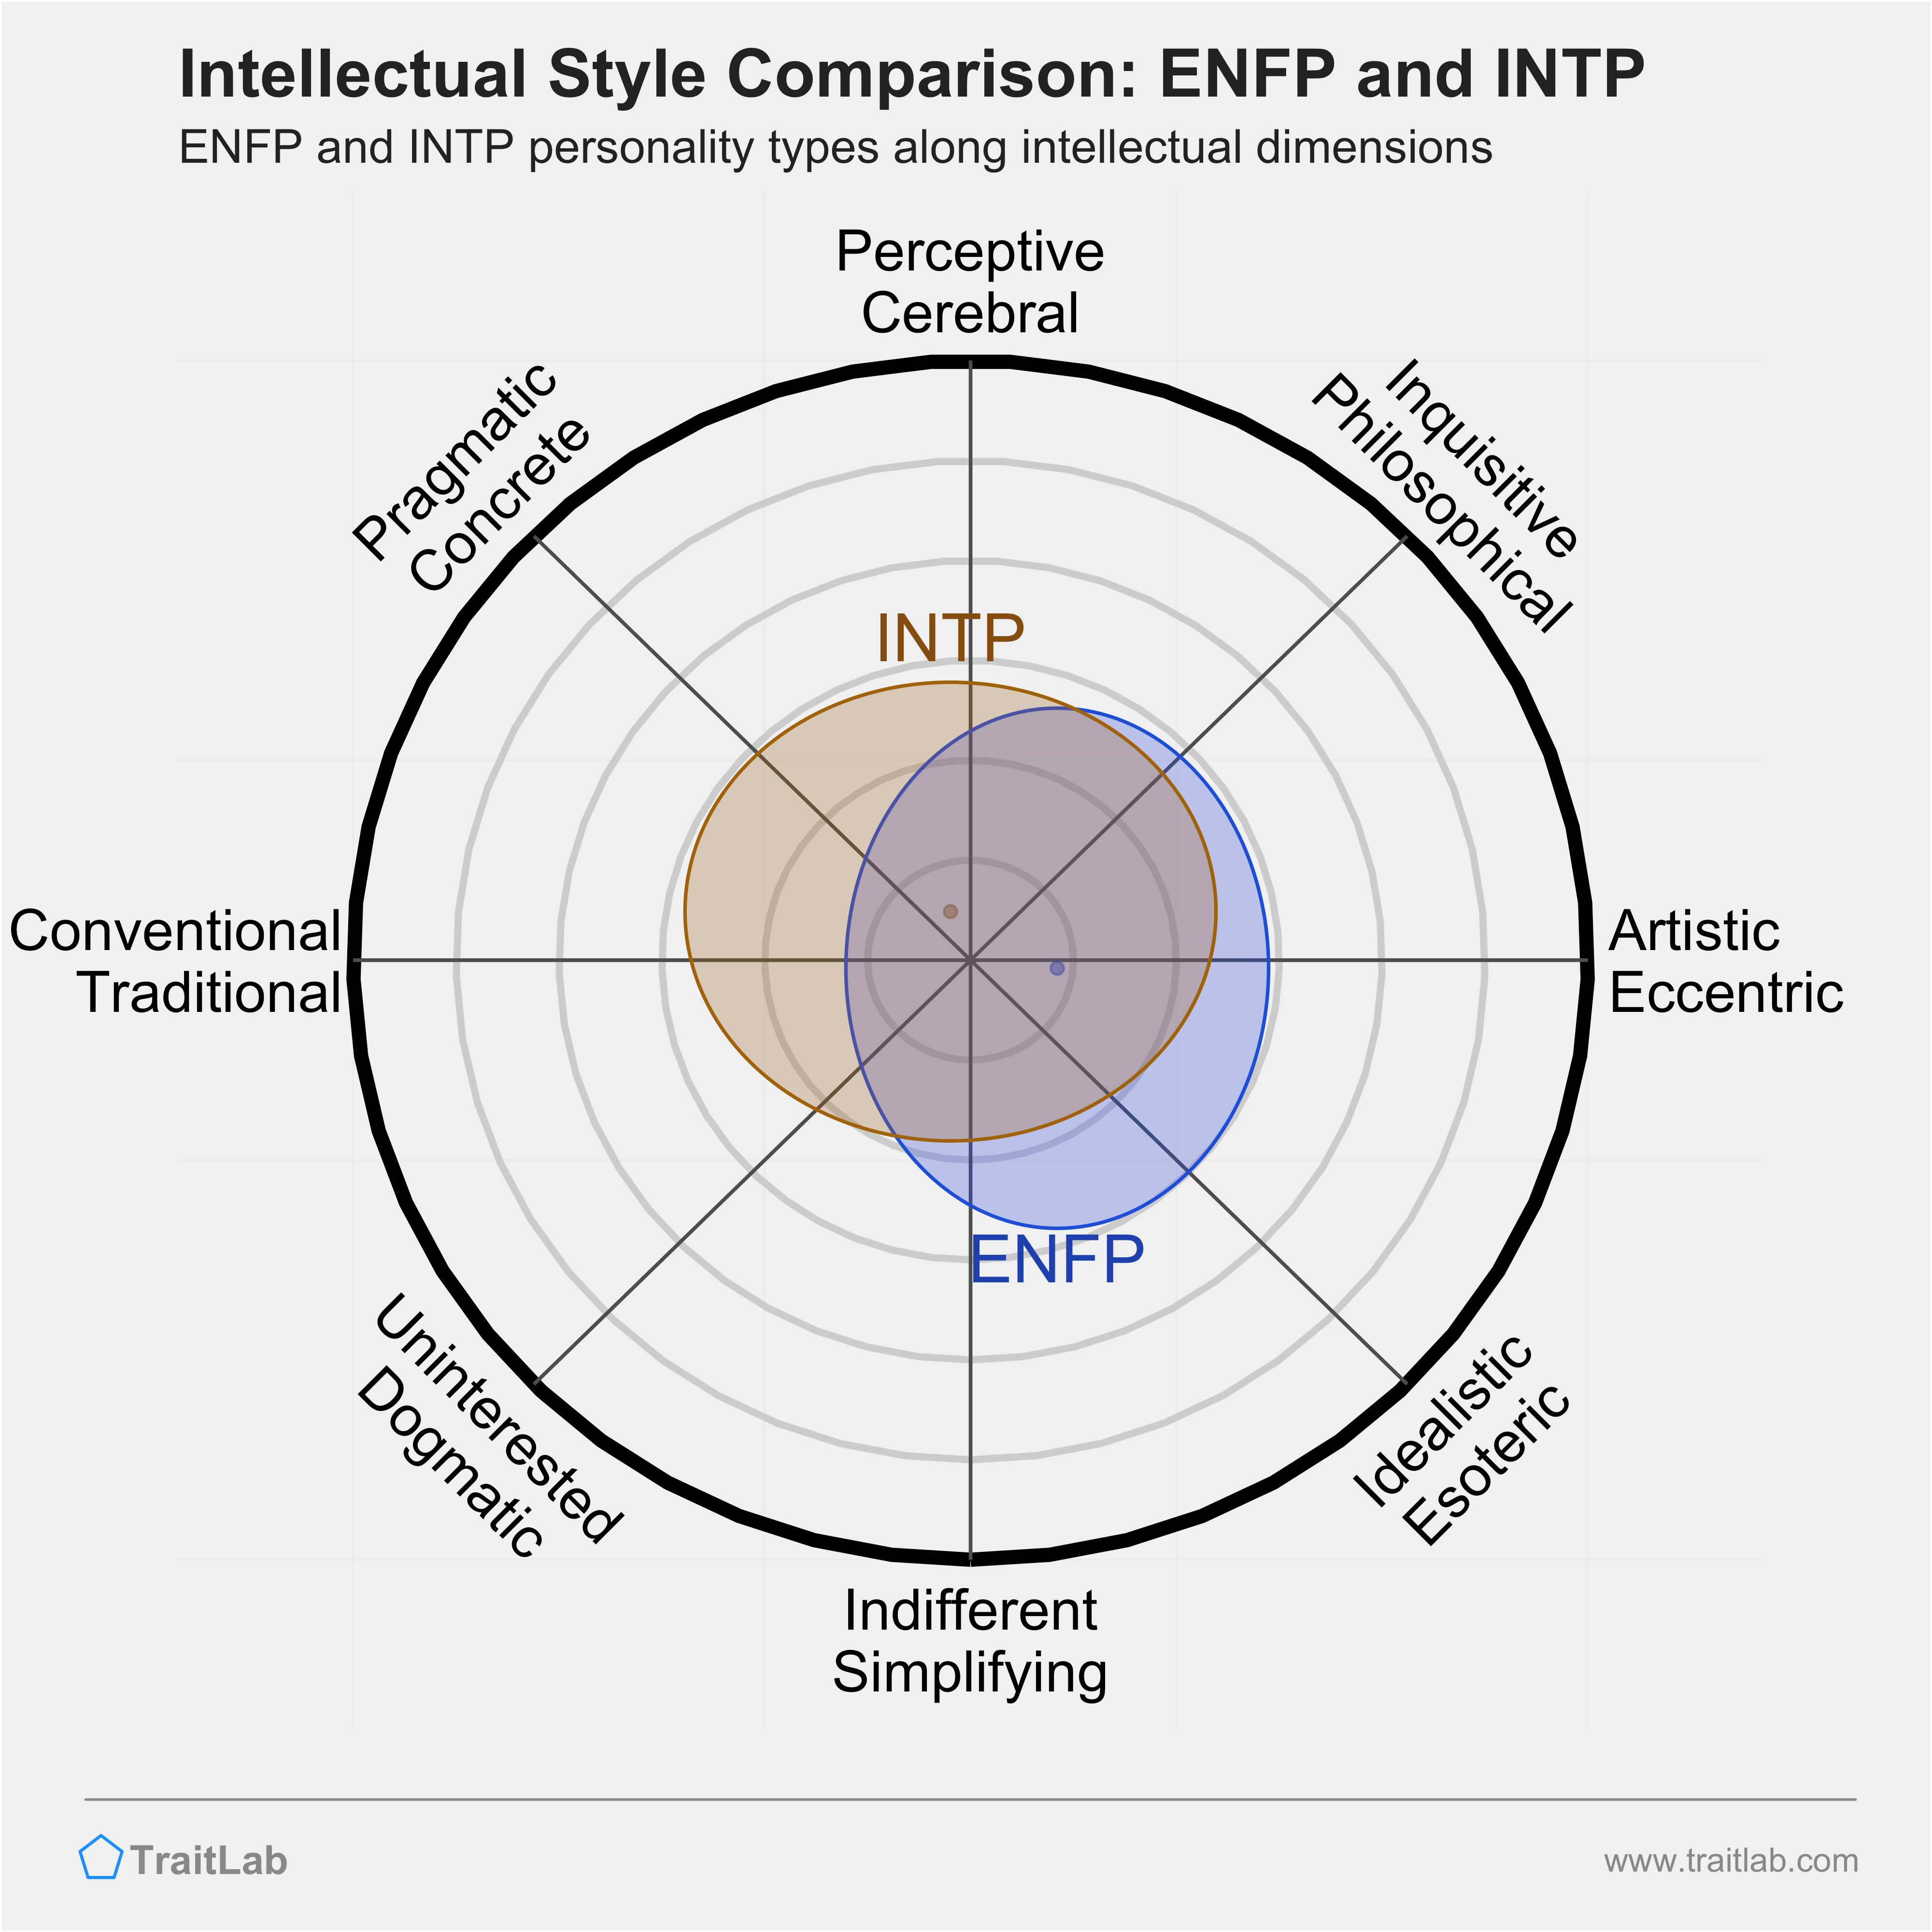 ENFP and INTP comparison across intellectual dimensions